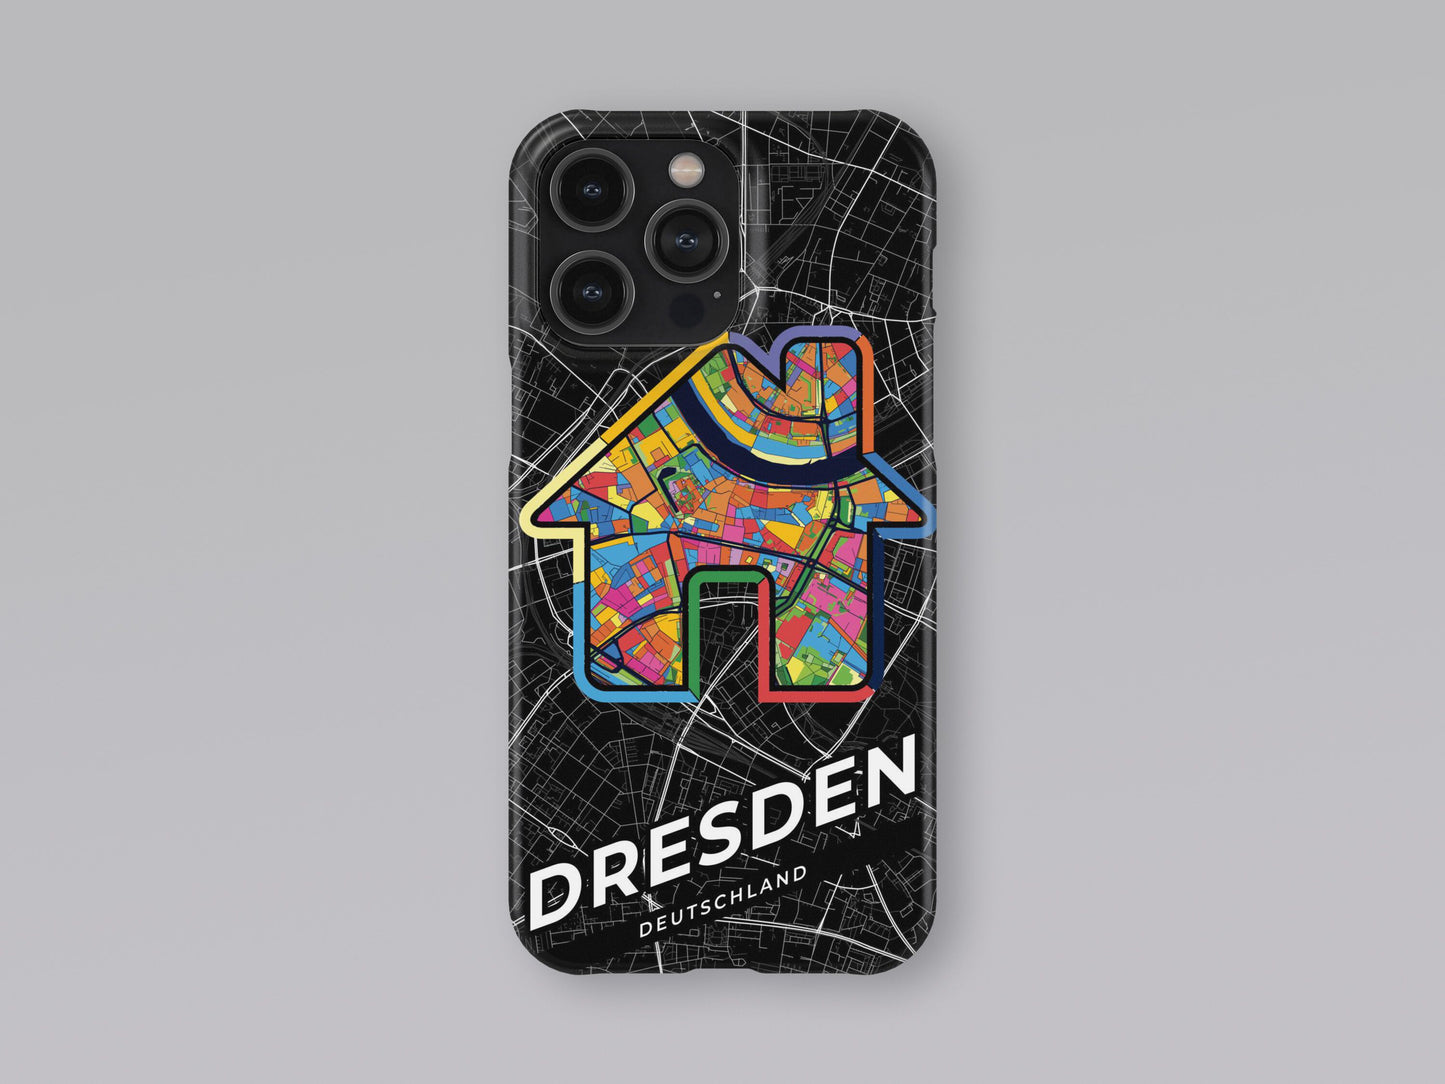 Dresden Deutschland slim phone case with colorful icon. Birthday, wedding or housewarming gift. Couple match cases. 3